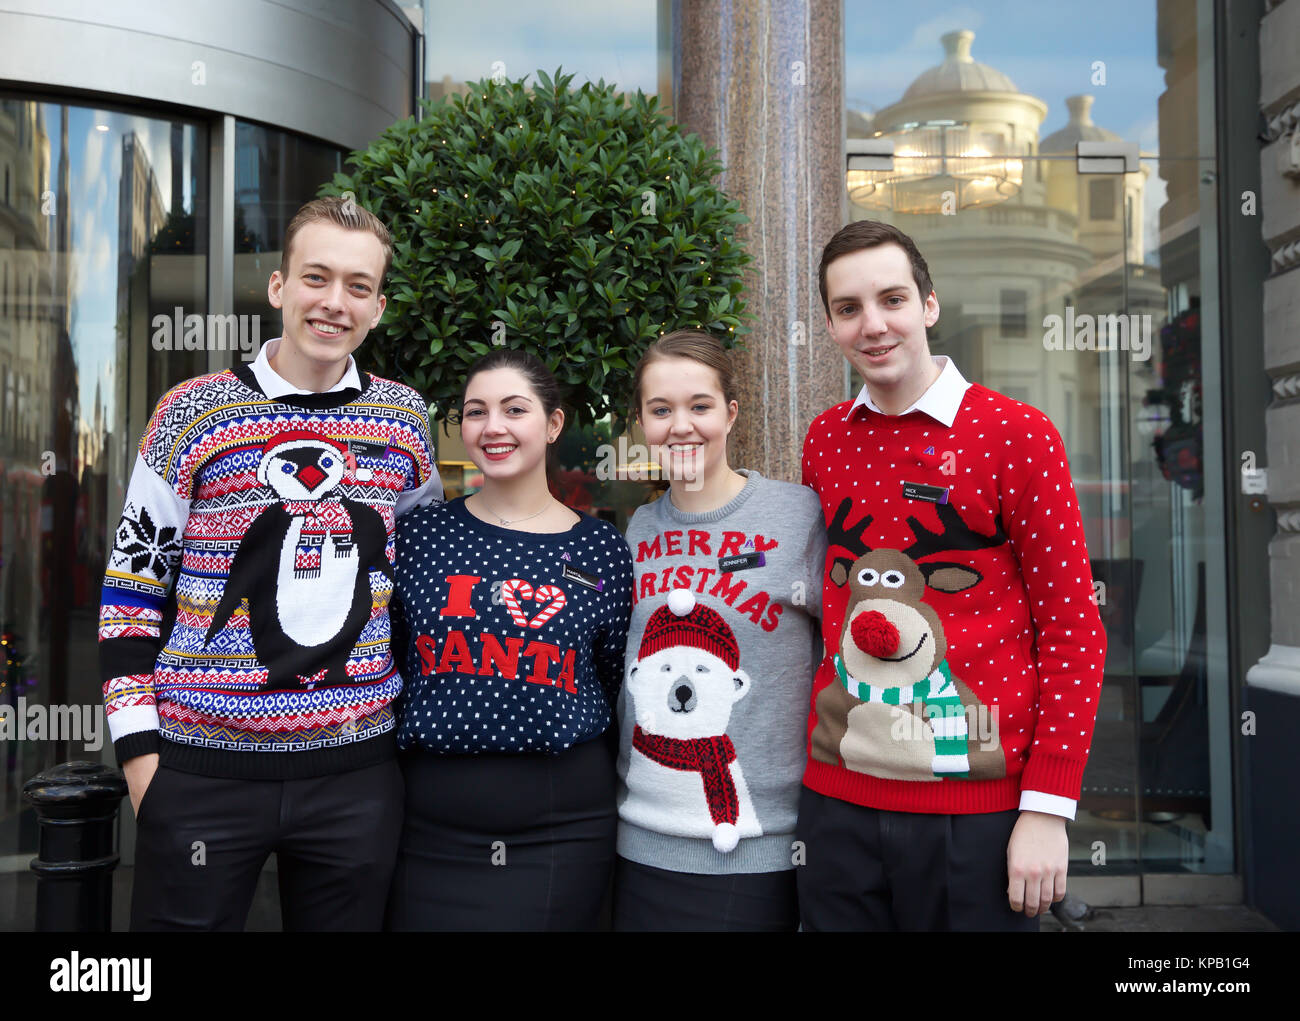 London, UK. 15th Dec, 2017. Amba Hotel staff in Charing Cross London join in Christmas Jumper Day, now in its fifth year, to raise money for Save the Children fund. Credit: Keith Larby/Alamy Live News Stock Photo